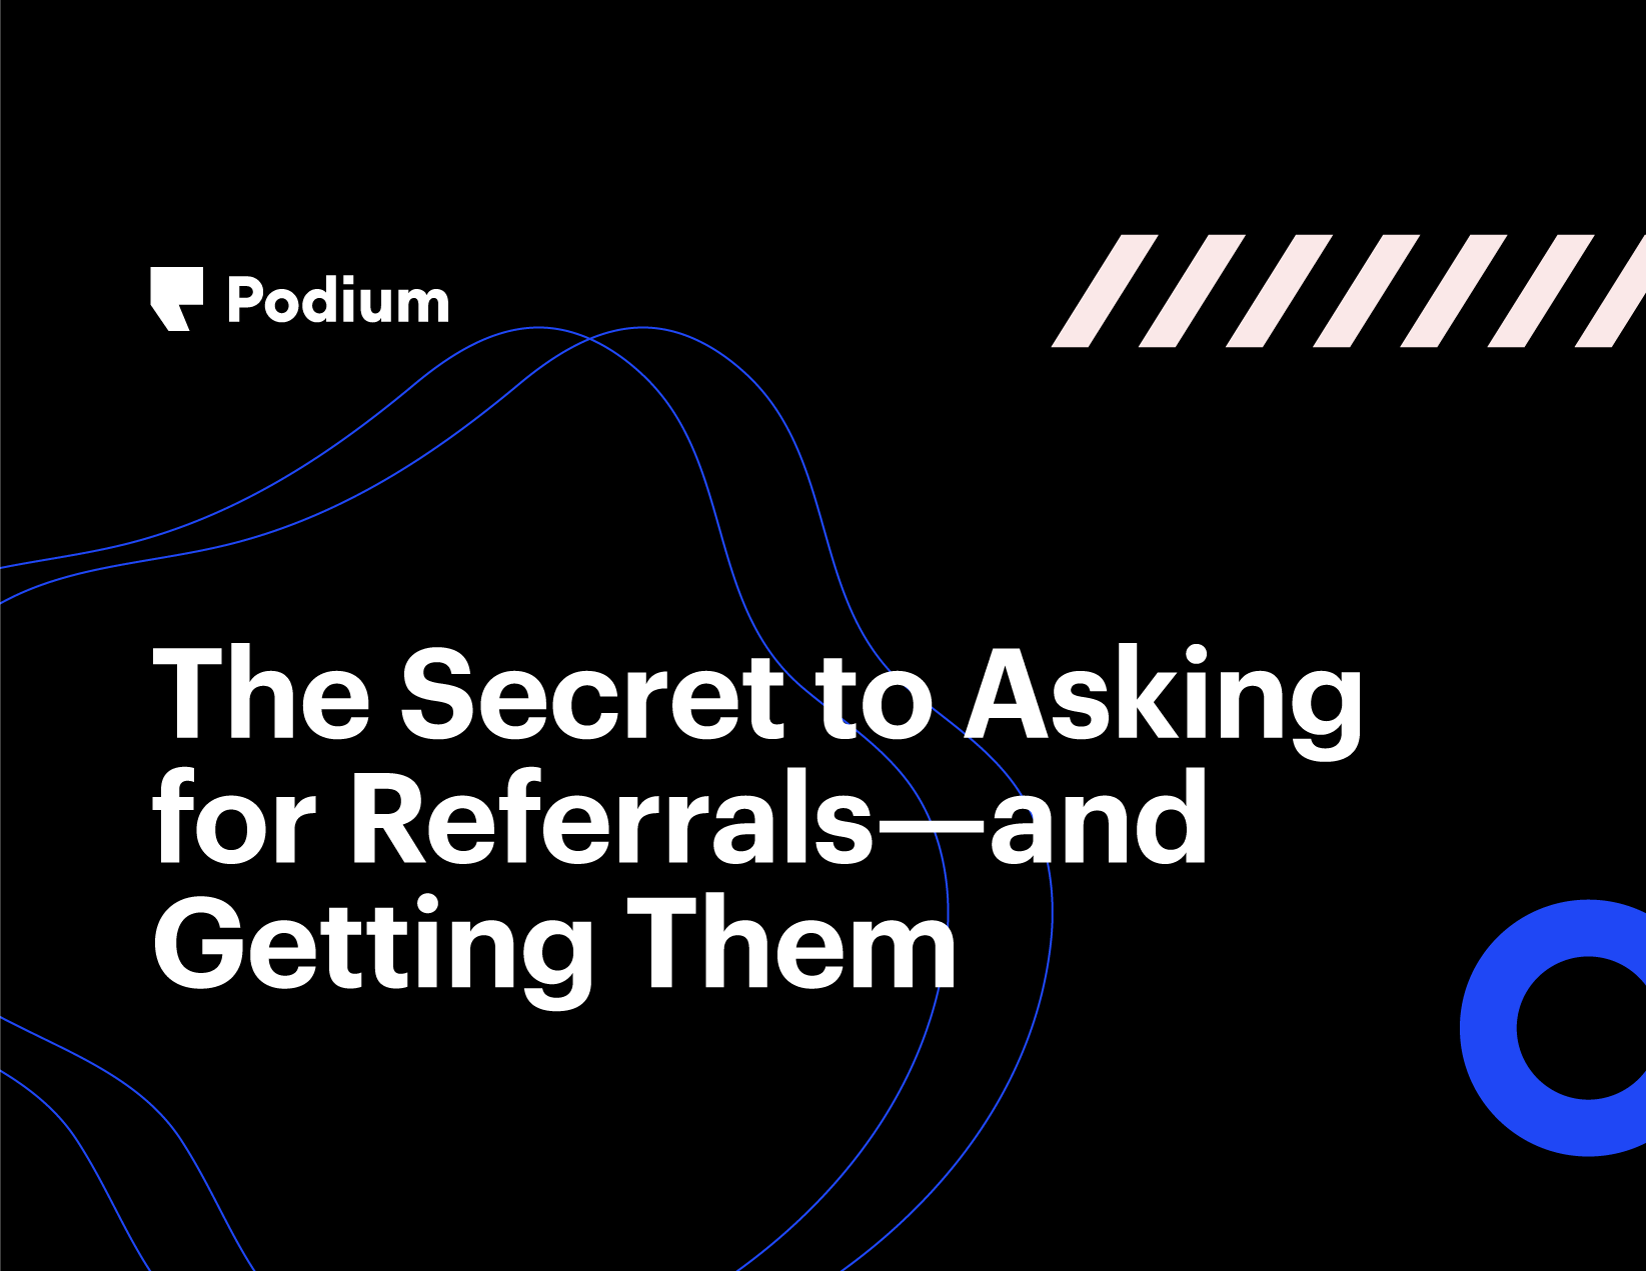 The Secret to Asking for Referrals—and Getting Them.